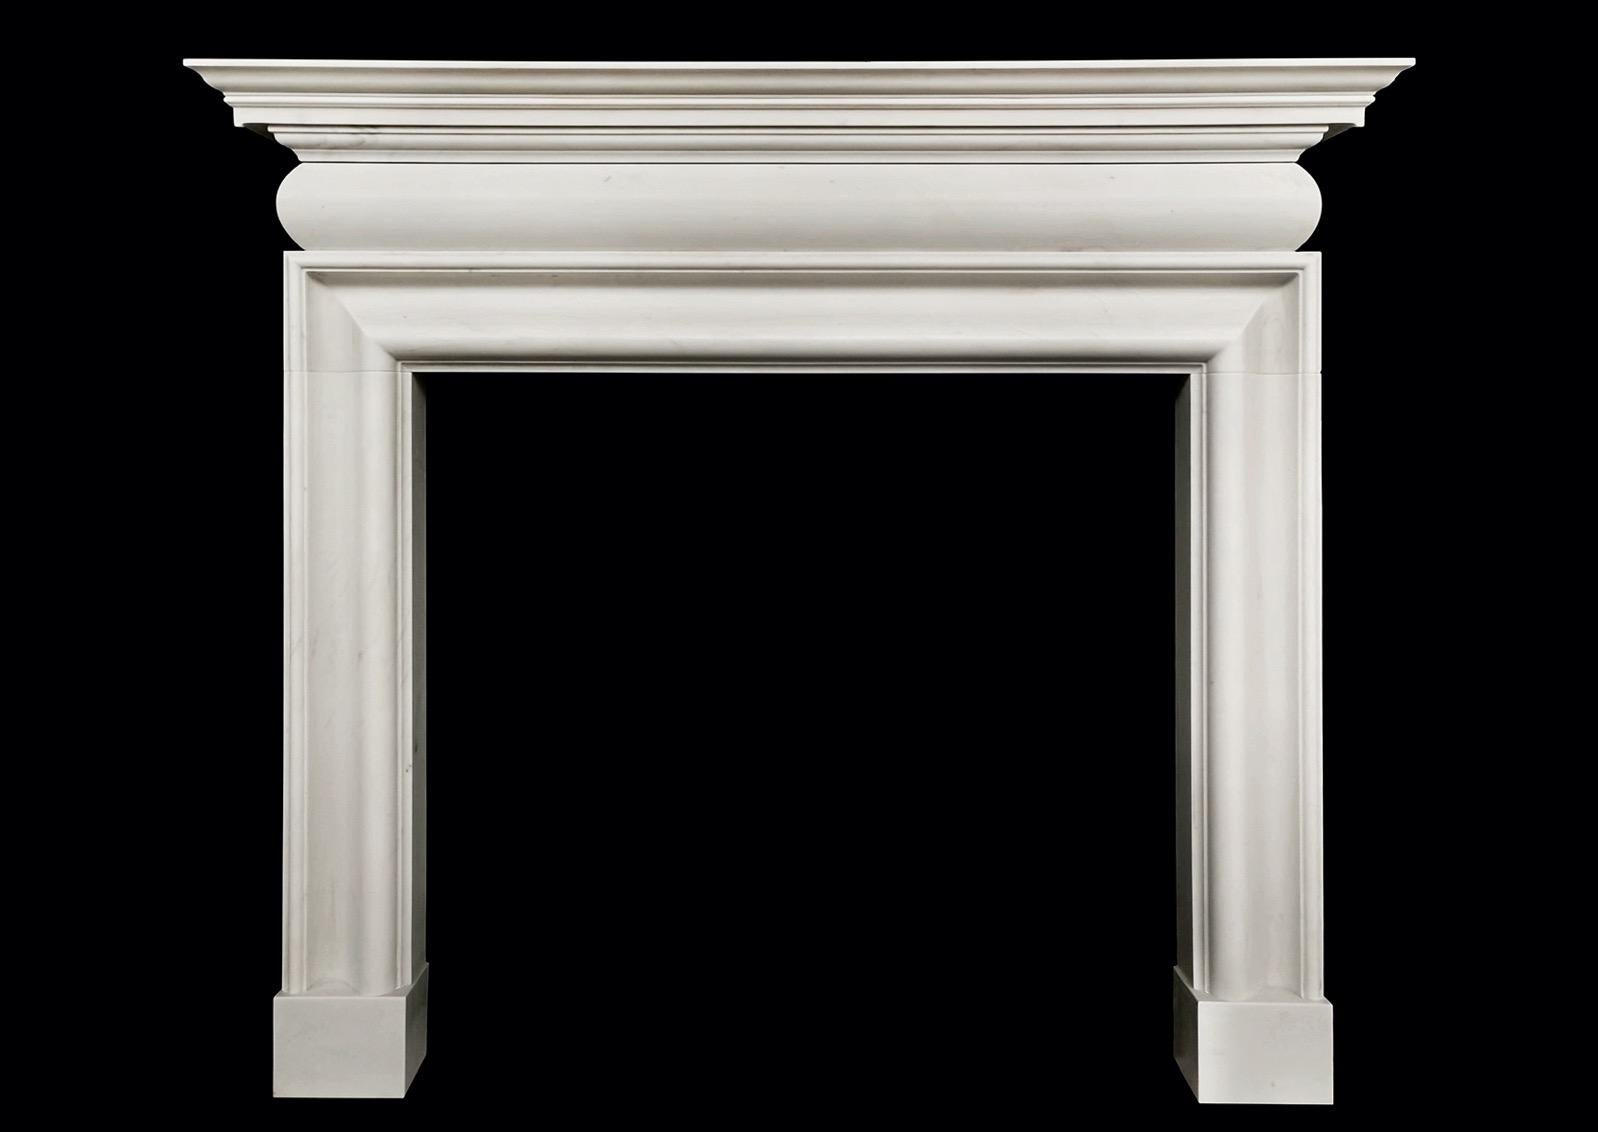 An architectural fireplace in the Georgian manner. The inner bolection moulding surmounted by barrel frieze and moulded shelf above. Shown in white marble but could be made in other marbles or limestones if required. English, modern. 

Shelf